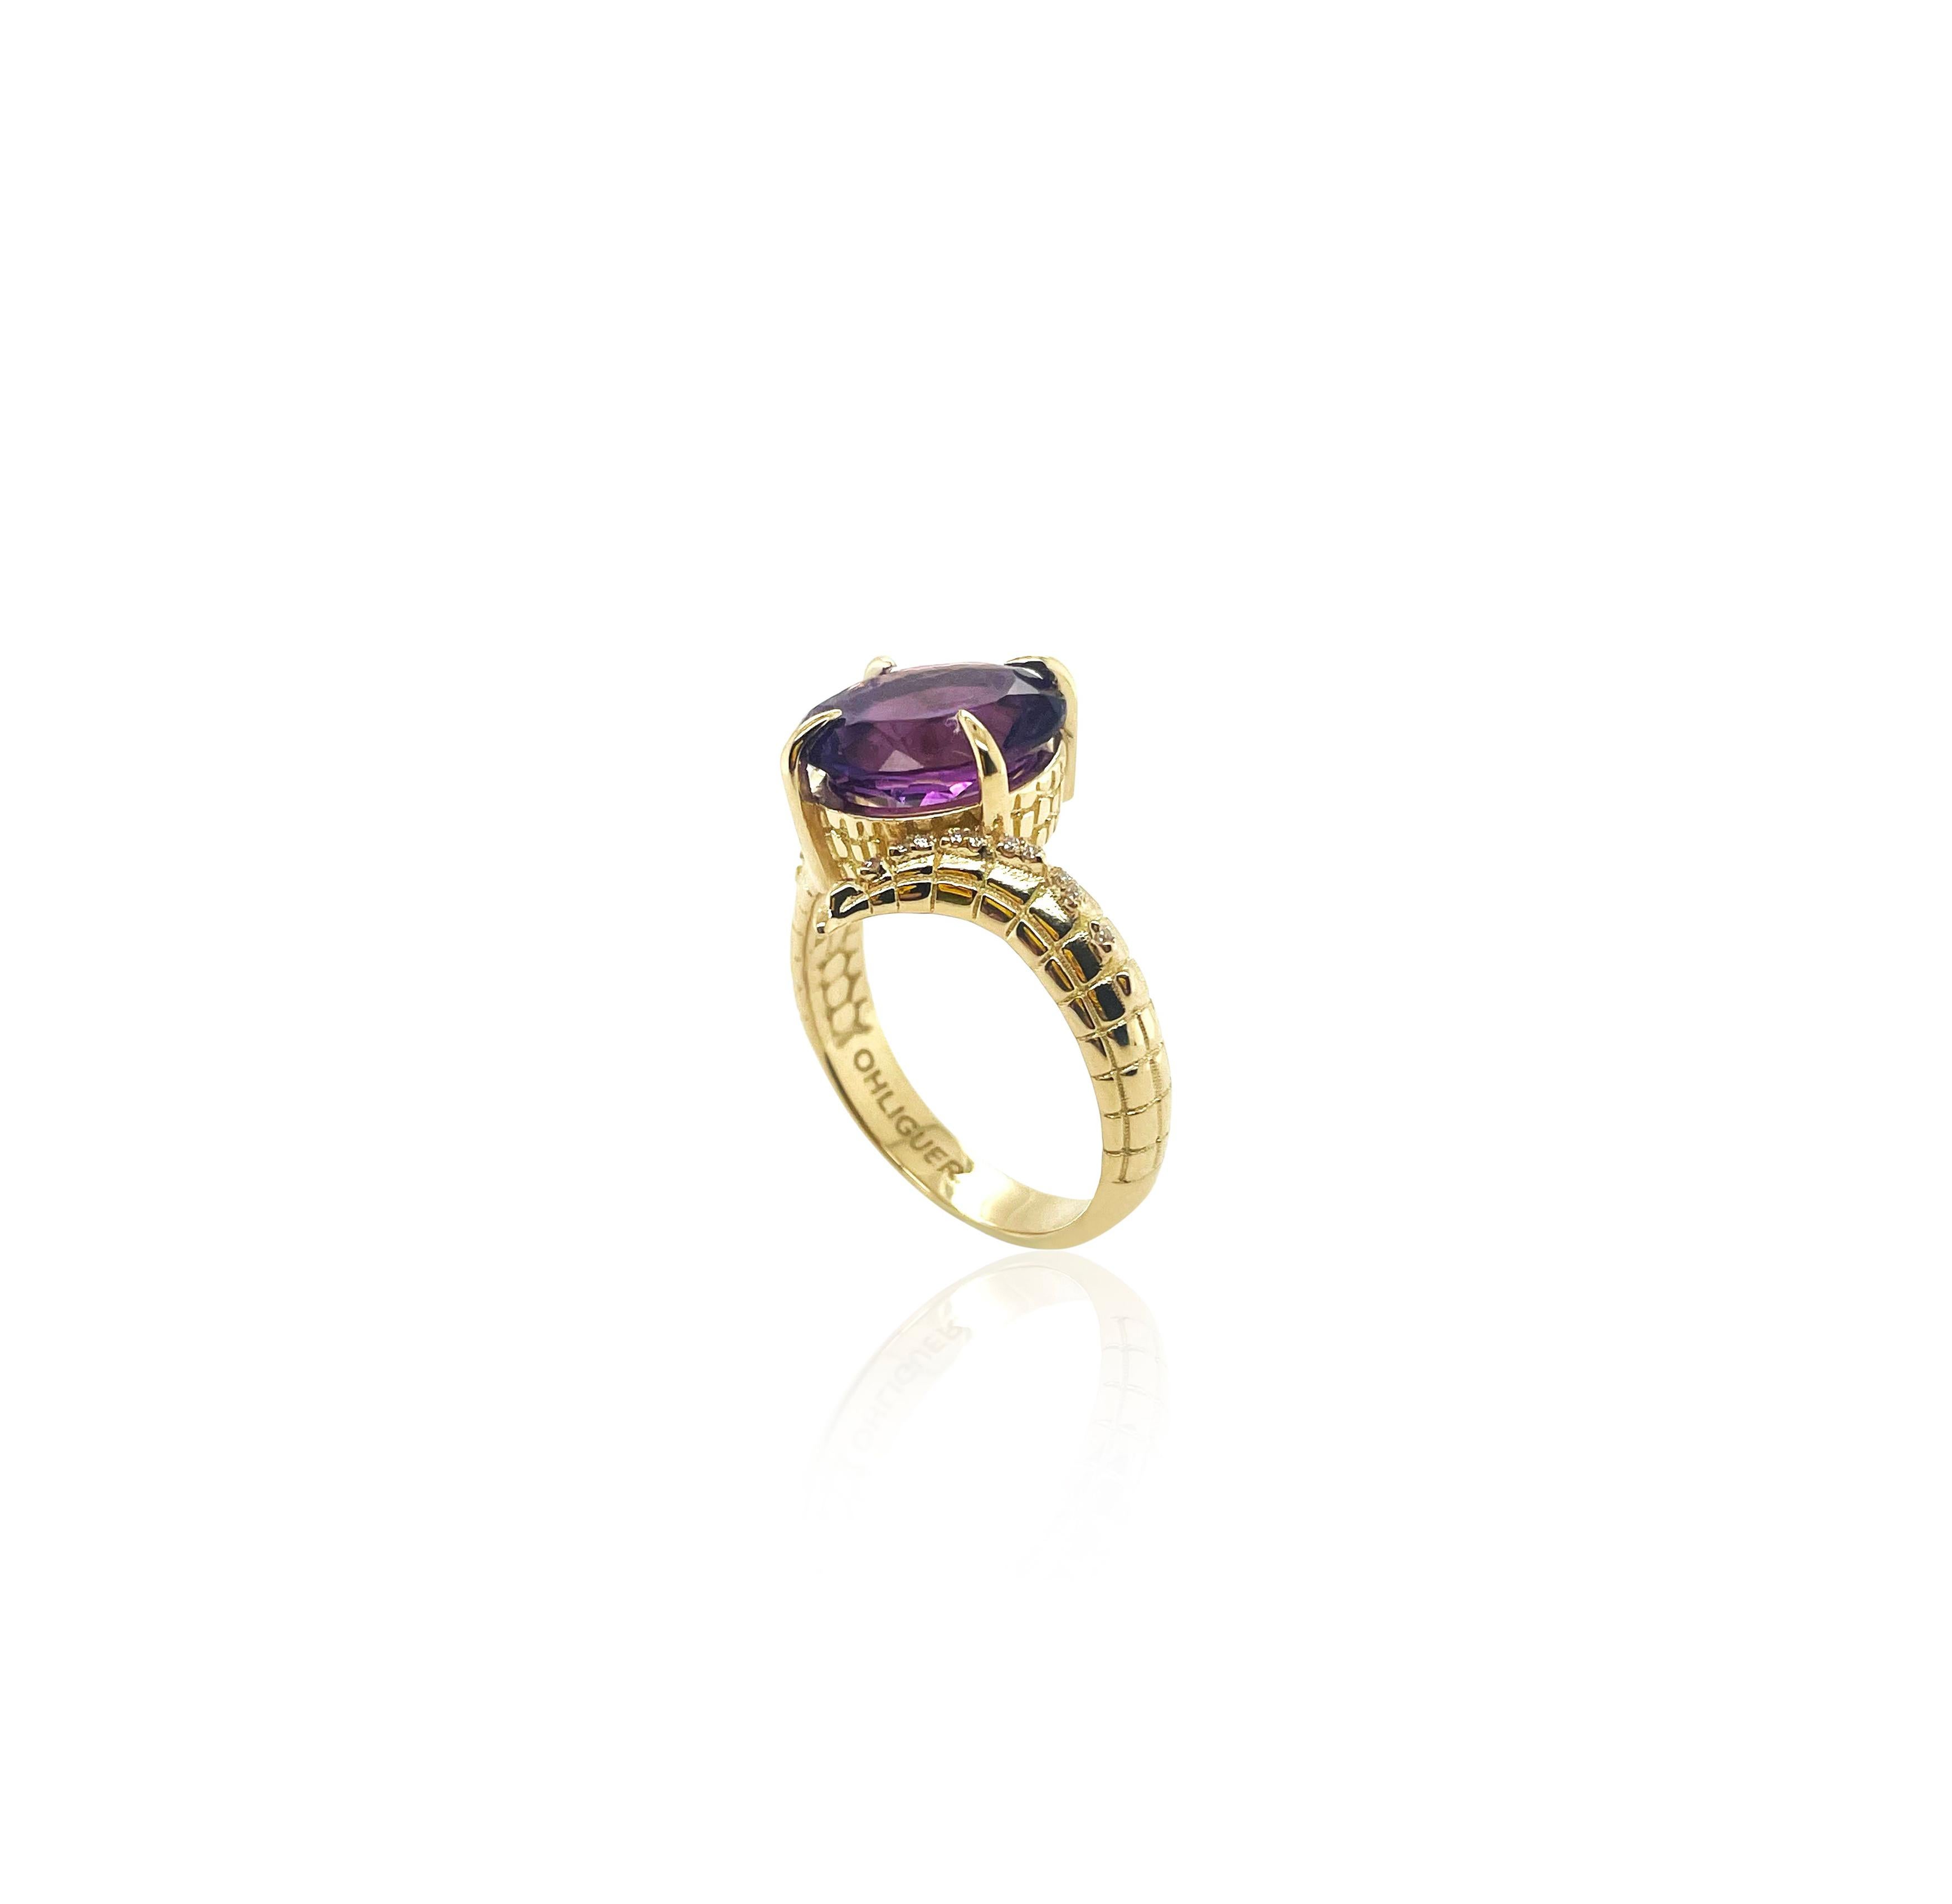 For Sale:  Croc Dragon Tail Ring with 5ct Oval Cut Amethyst with diamond spikes  7